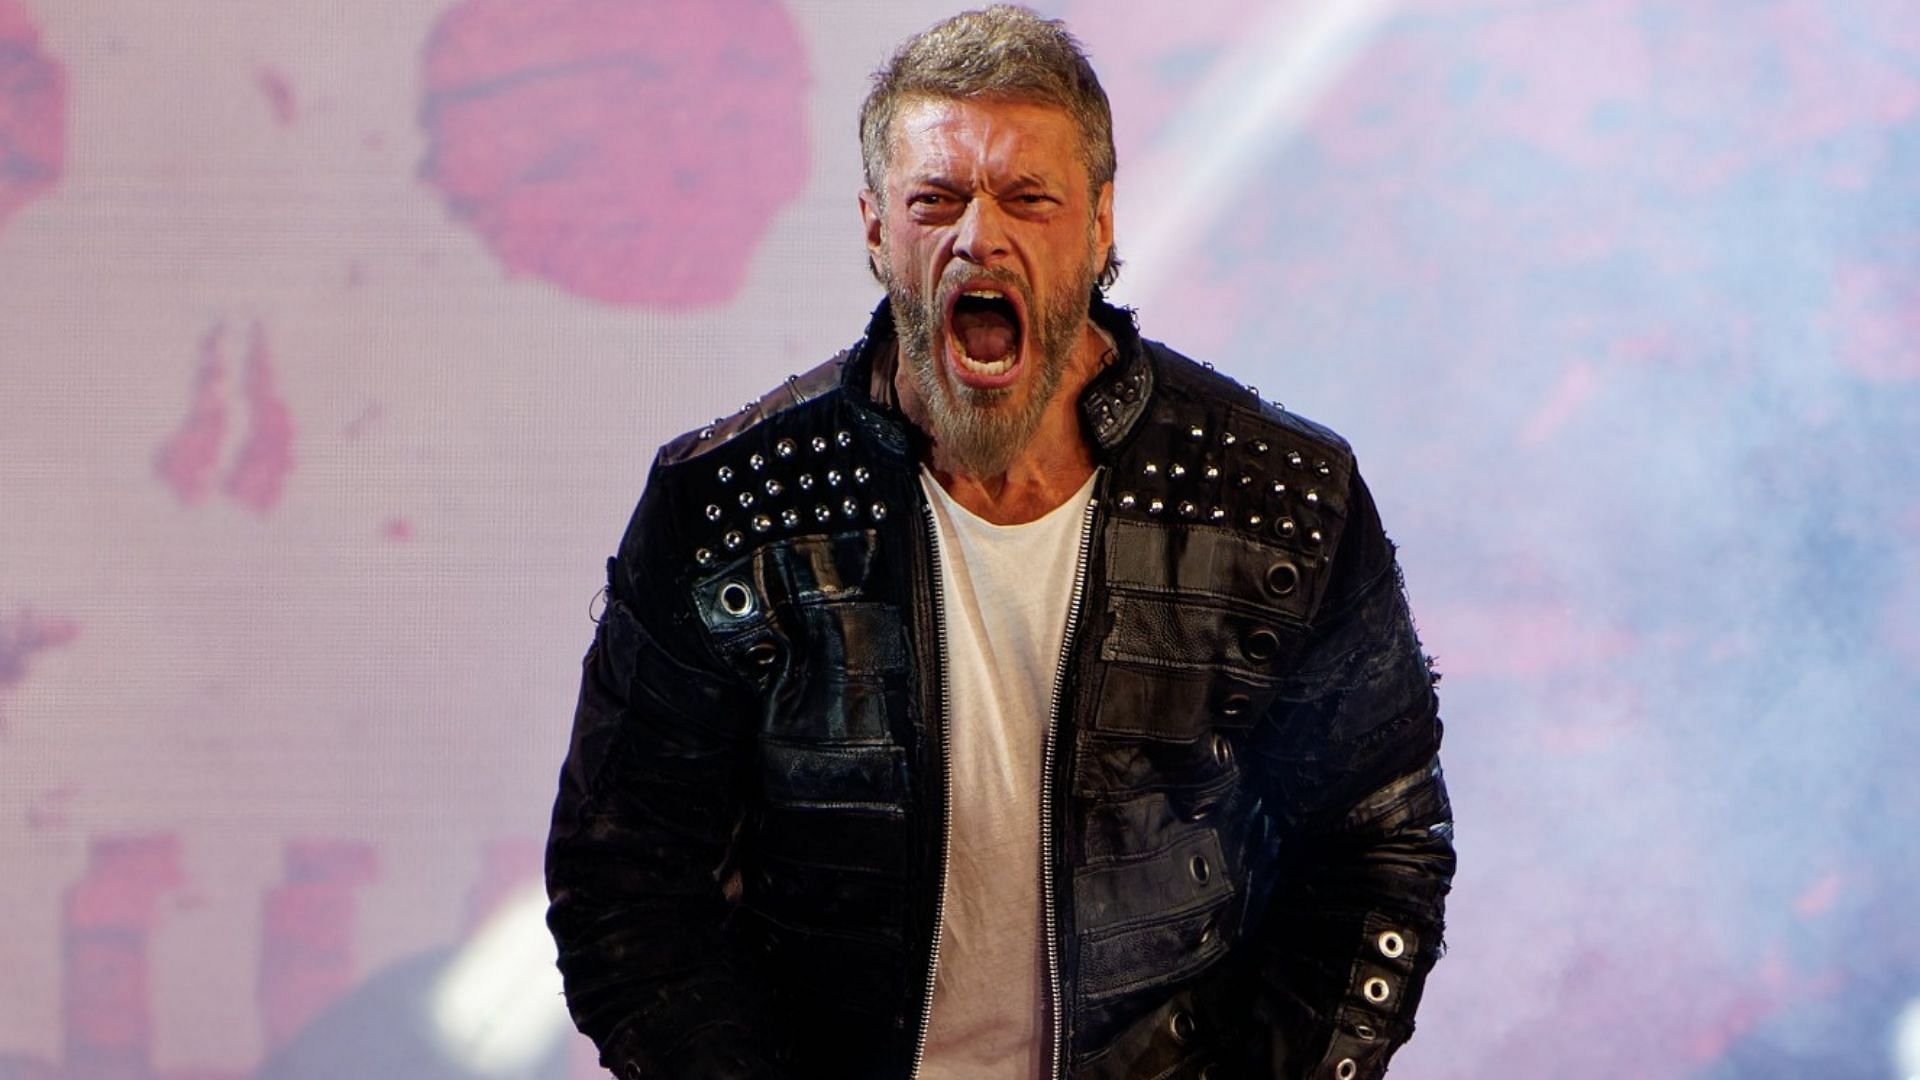 Edge is a WWE Hall of Famer who is now with AEW